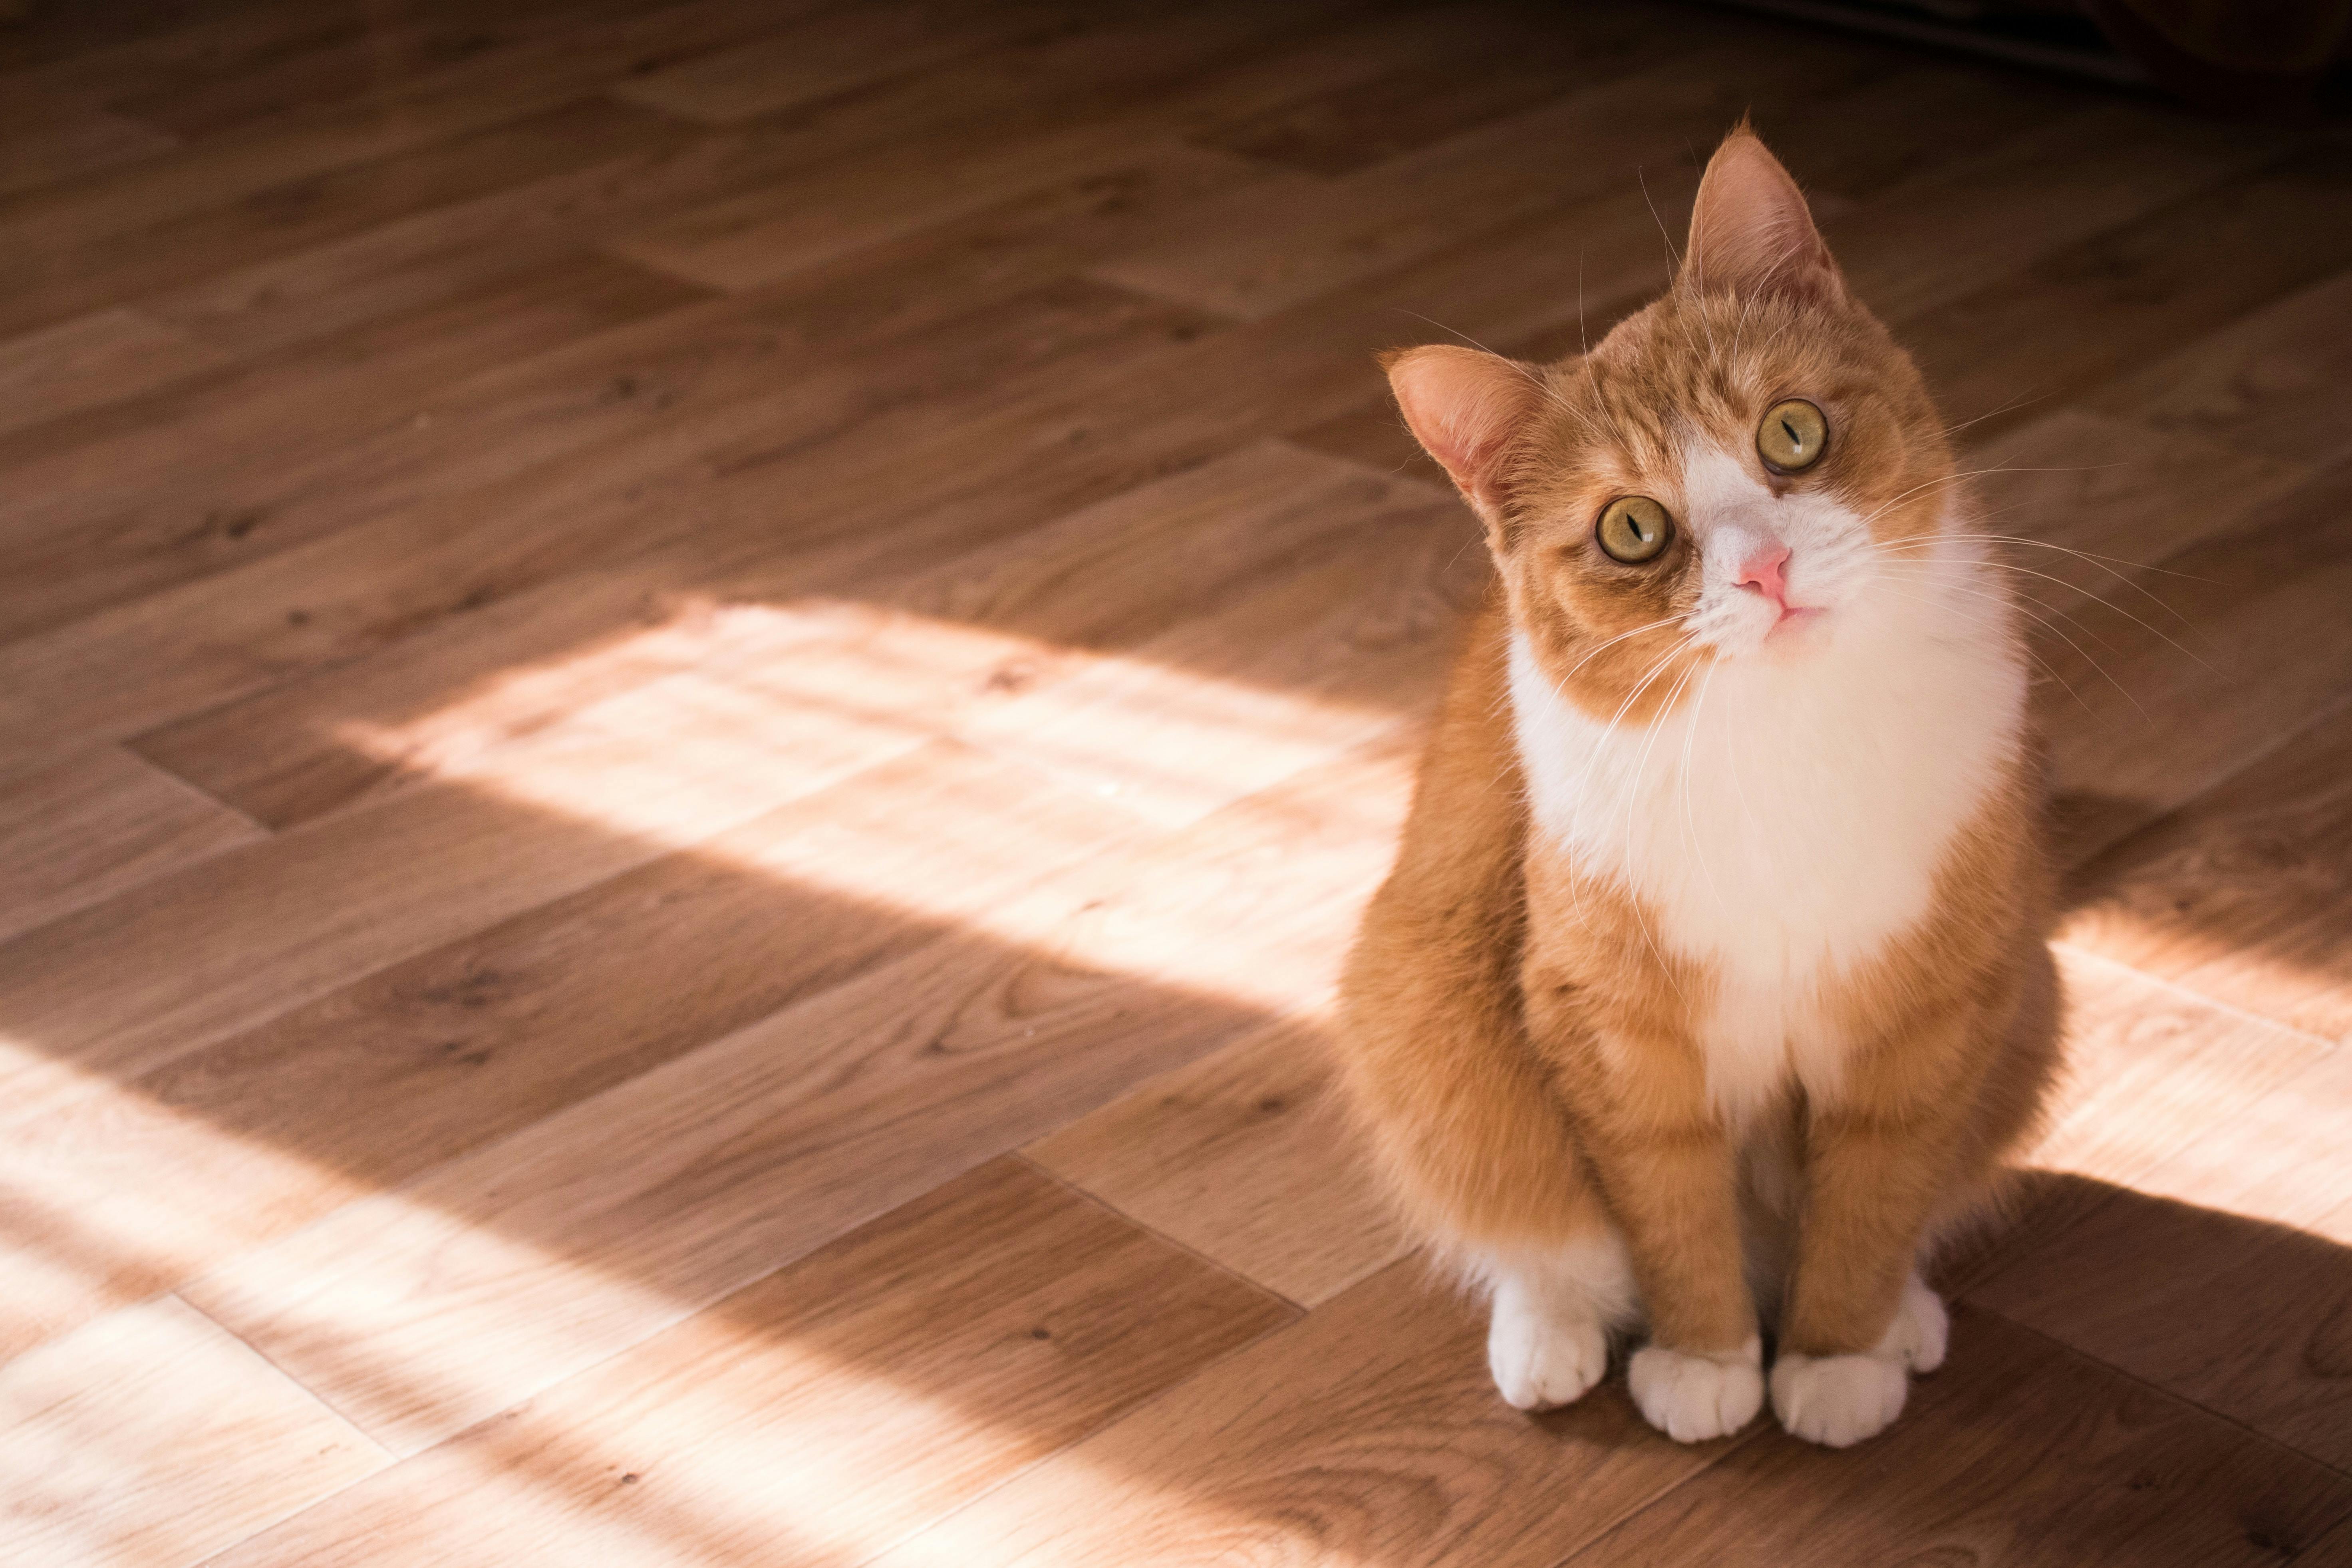 Orange and white cat sitting in a sun patch on a hardwood floor.